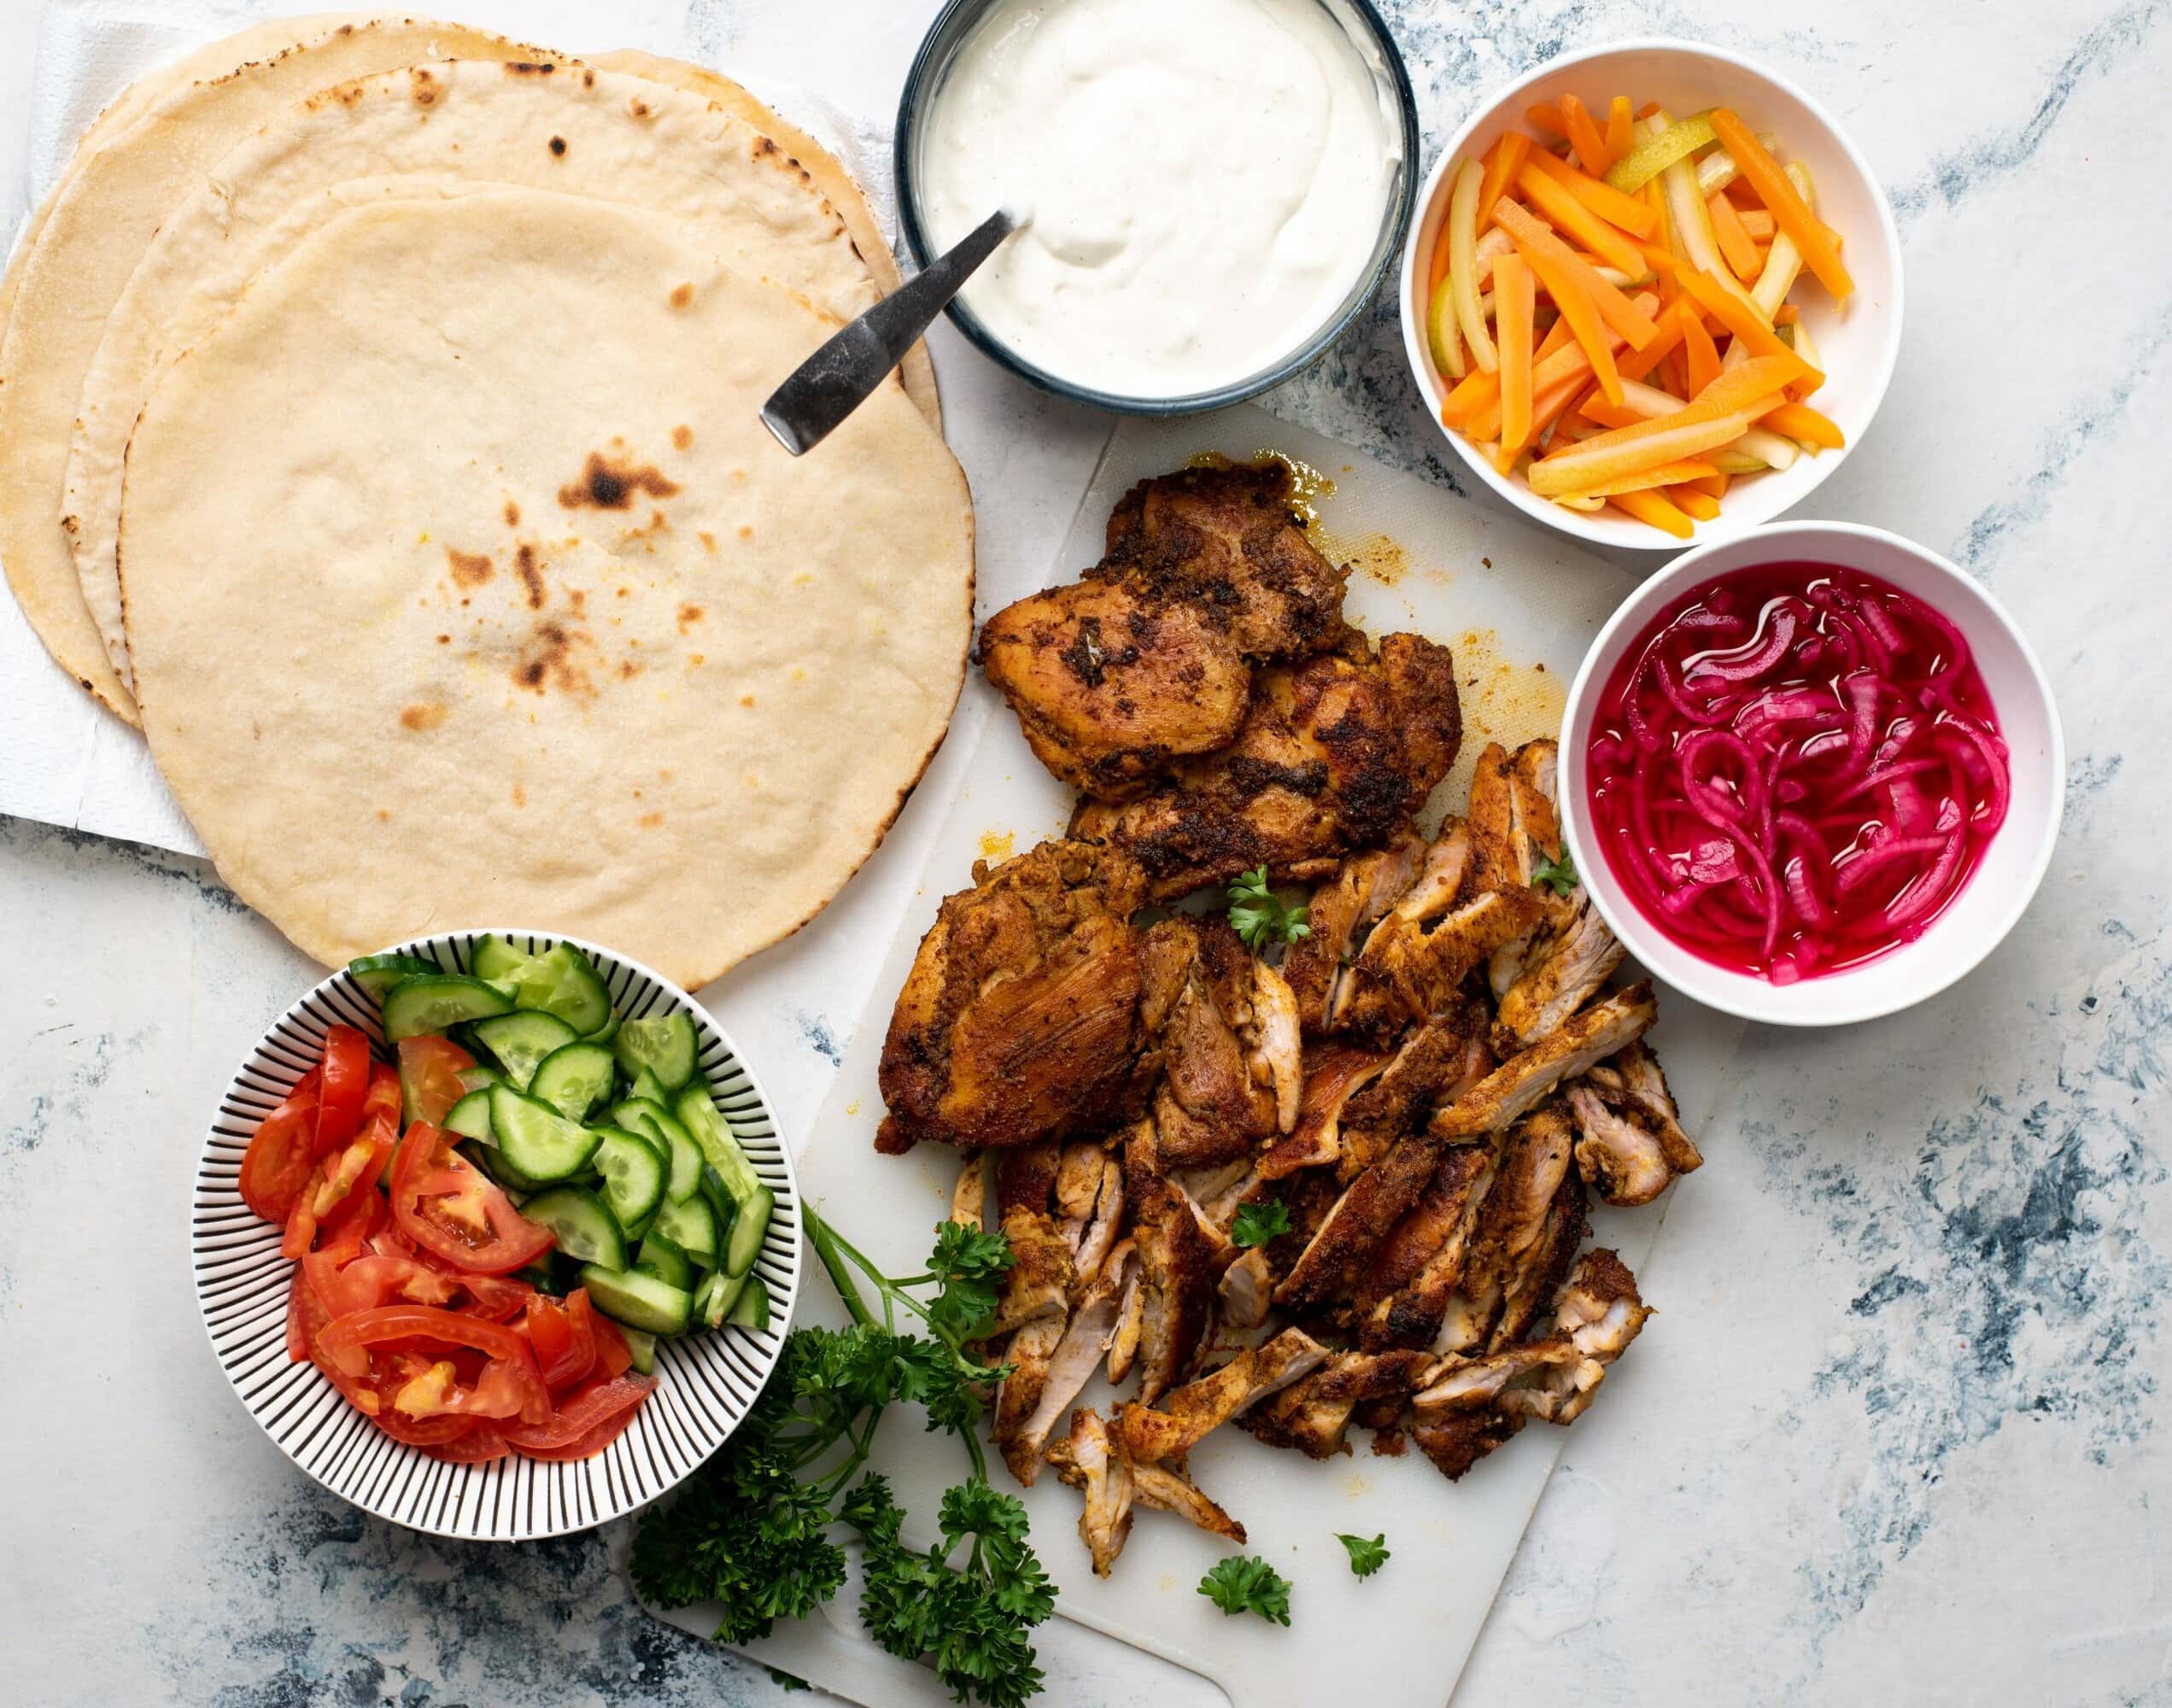 Shows what goes into chicken shawarma - Pita bread, grilled chicken, garlic sauce, pickled carrots and onions, chopped tomatoes and cucumber.